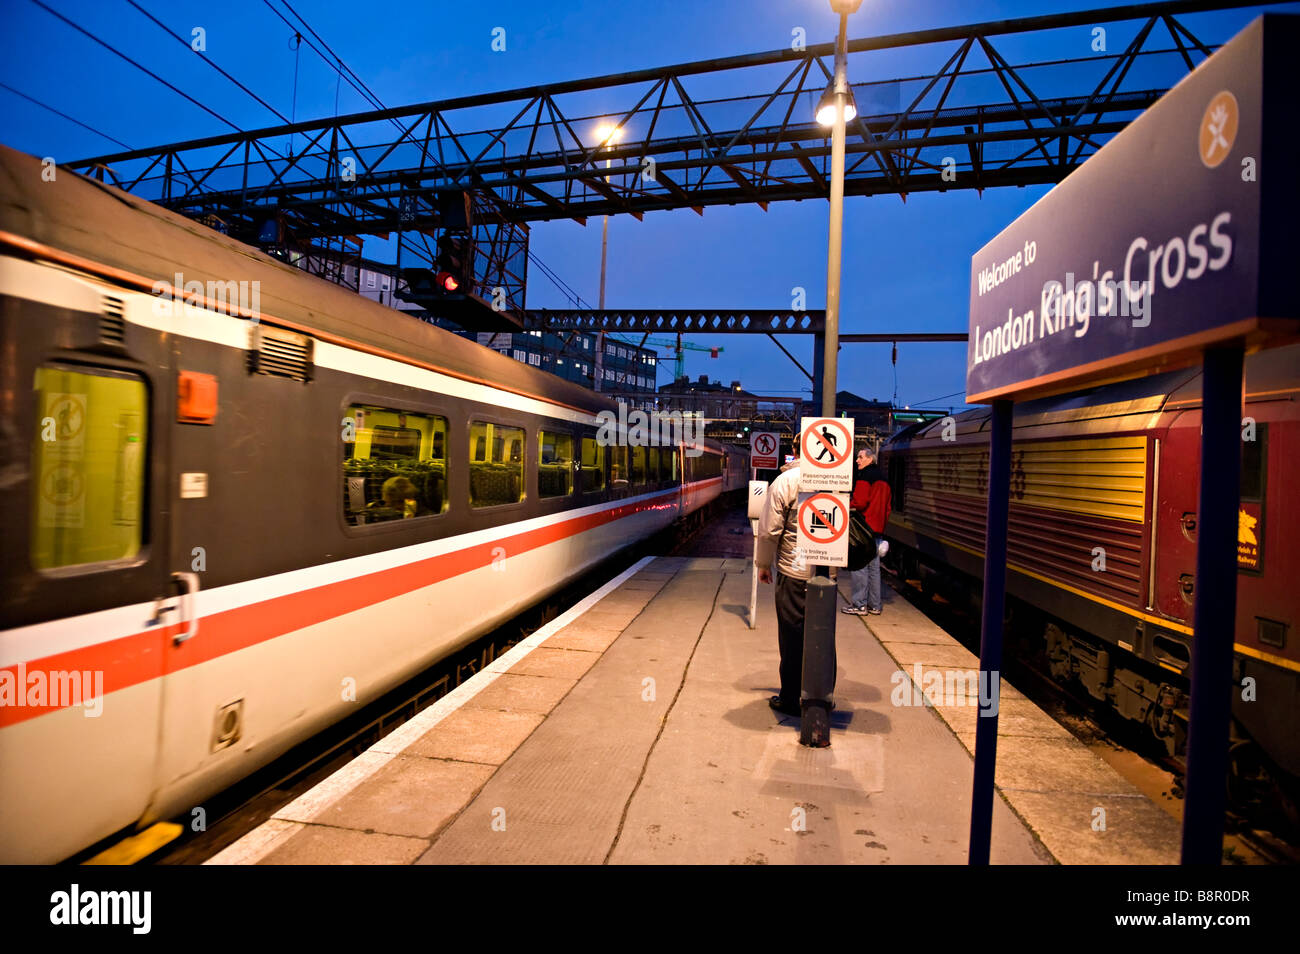 Early morning departure from King'sCross Railway Station, London, UK Stock Photo